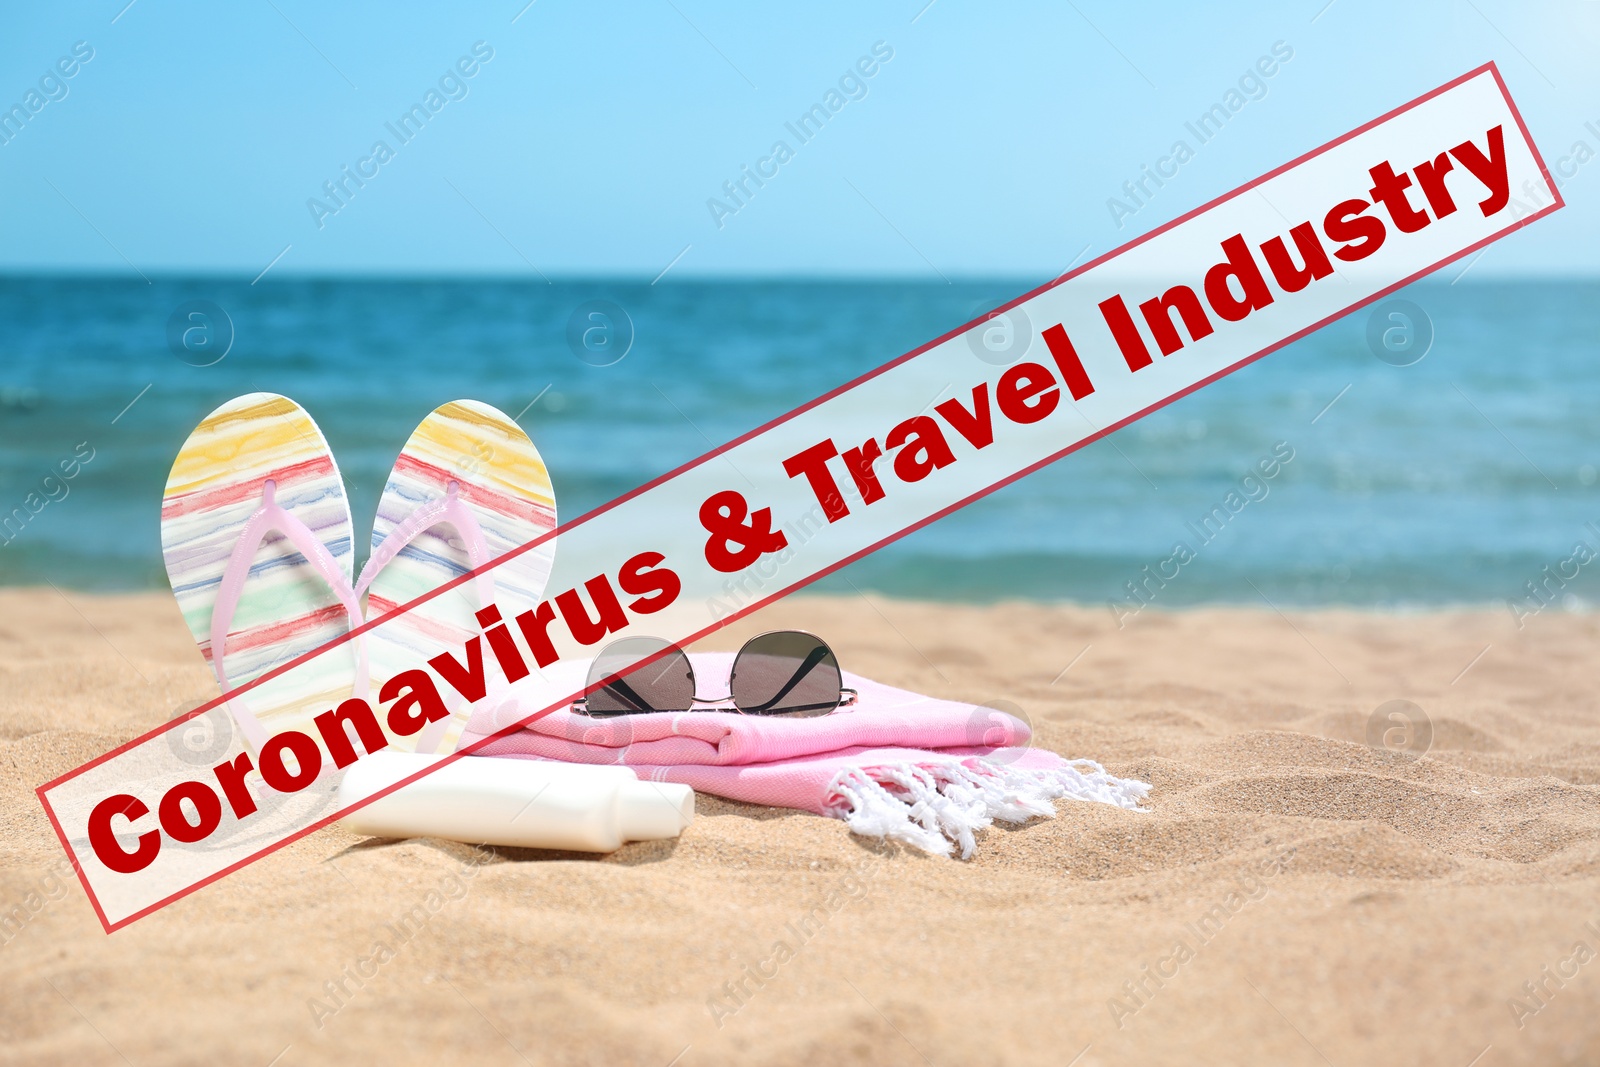 Image of Vacation cancellation concept. Different beach objects on sand near sea